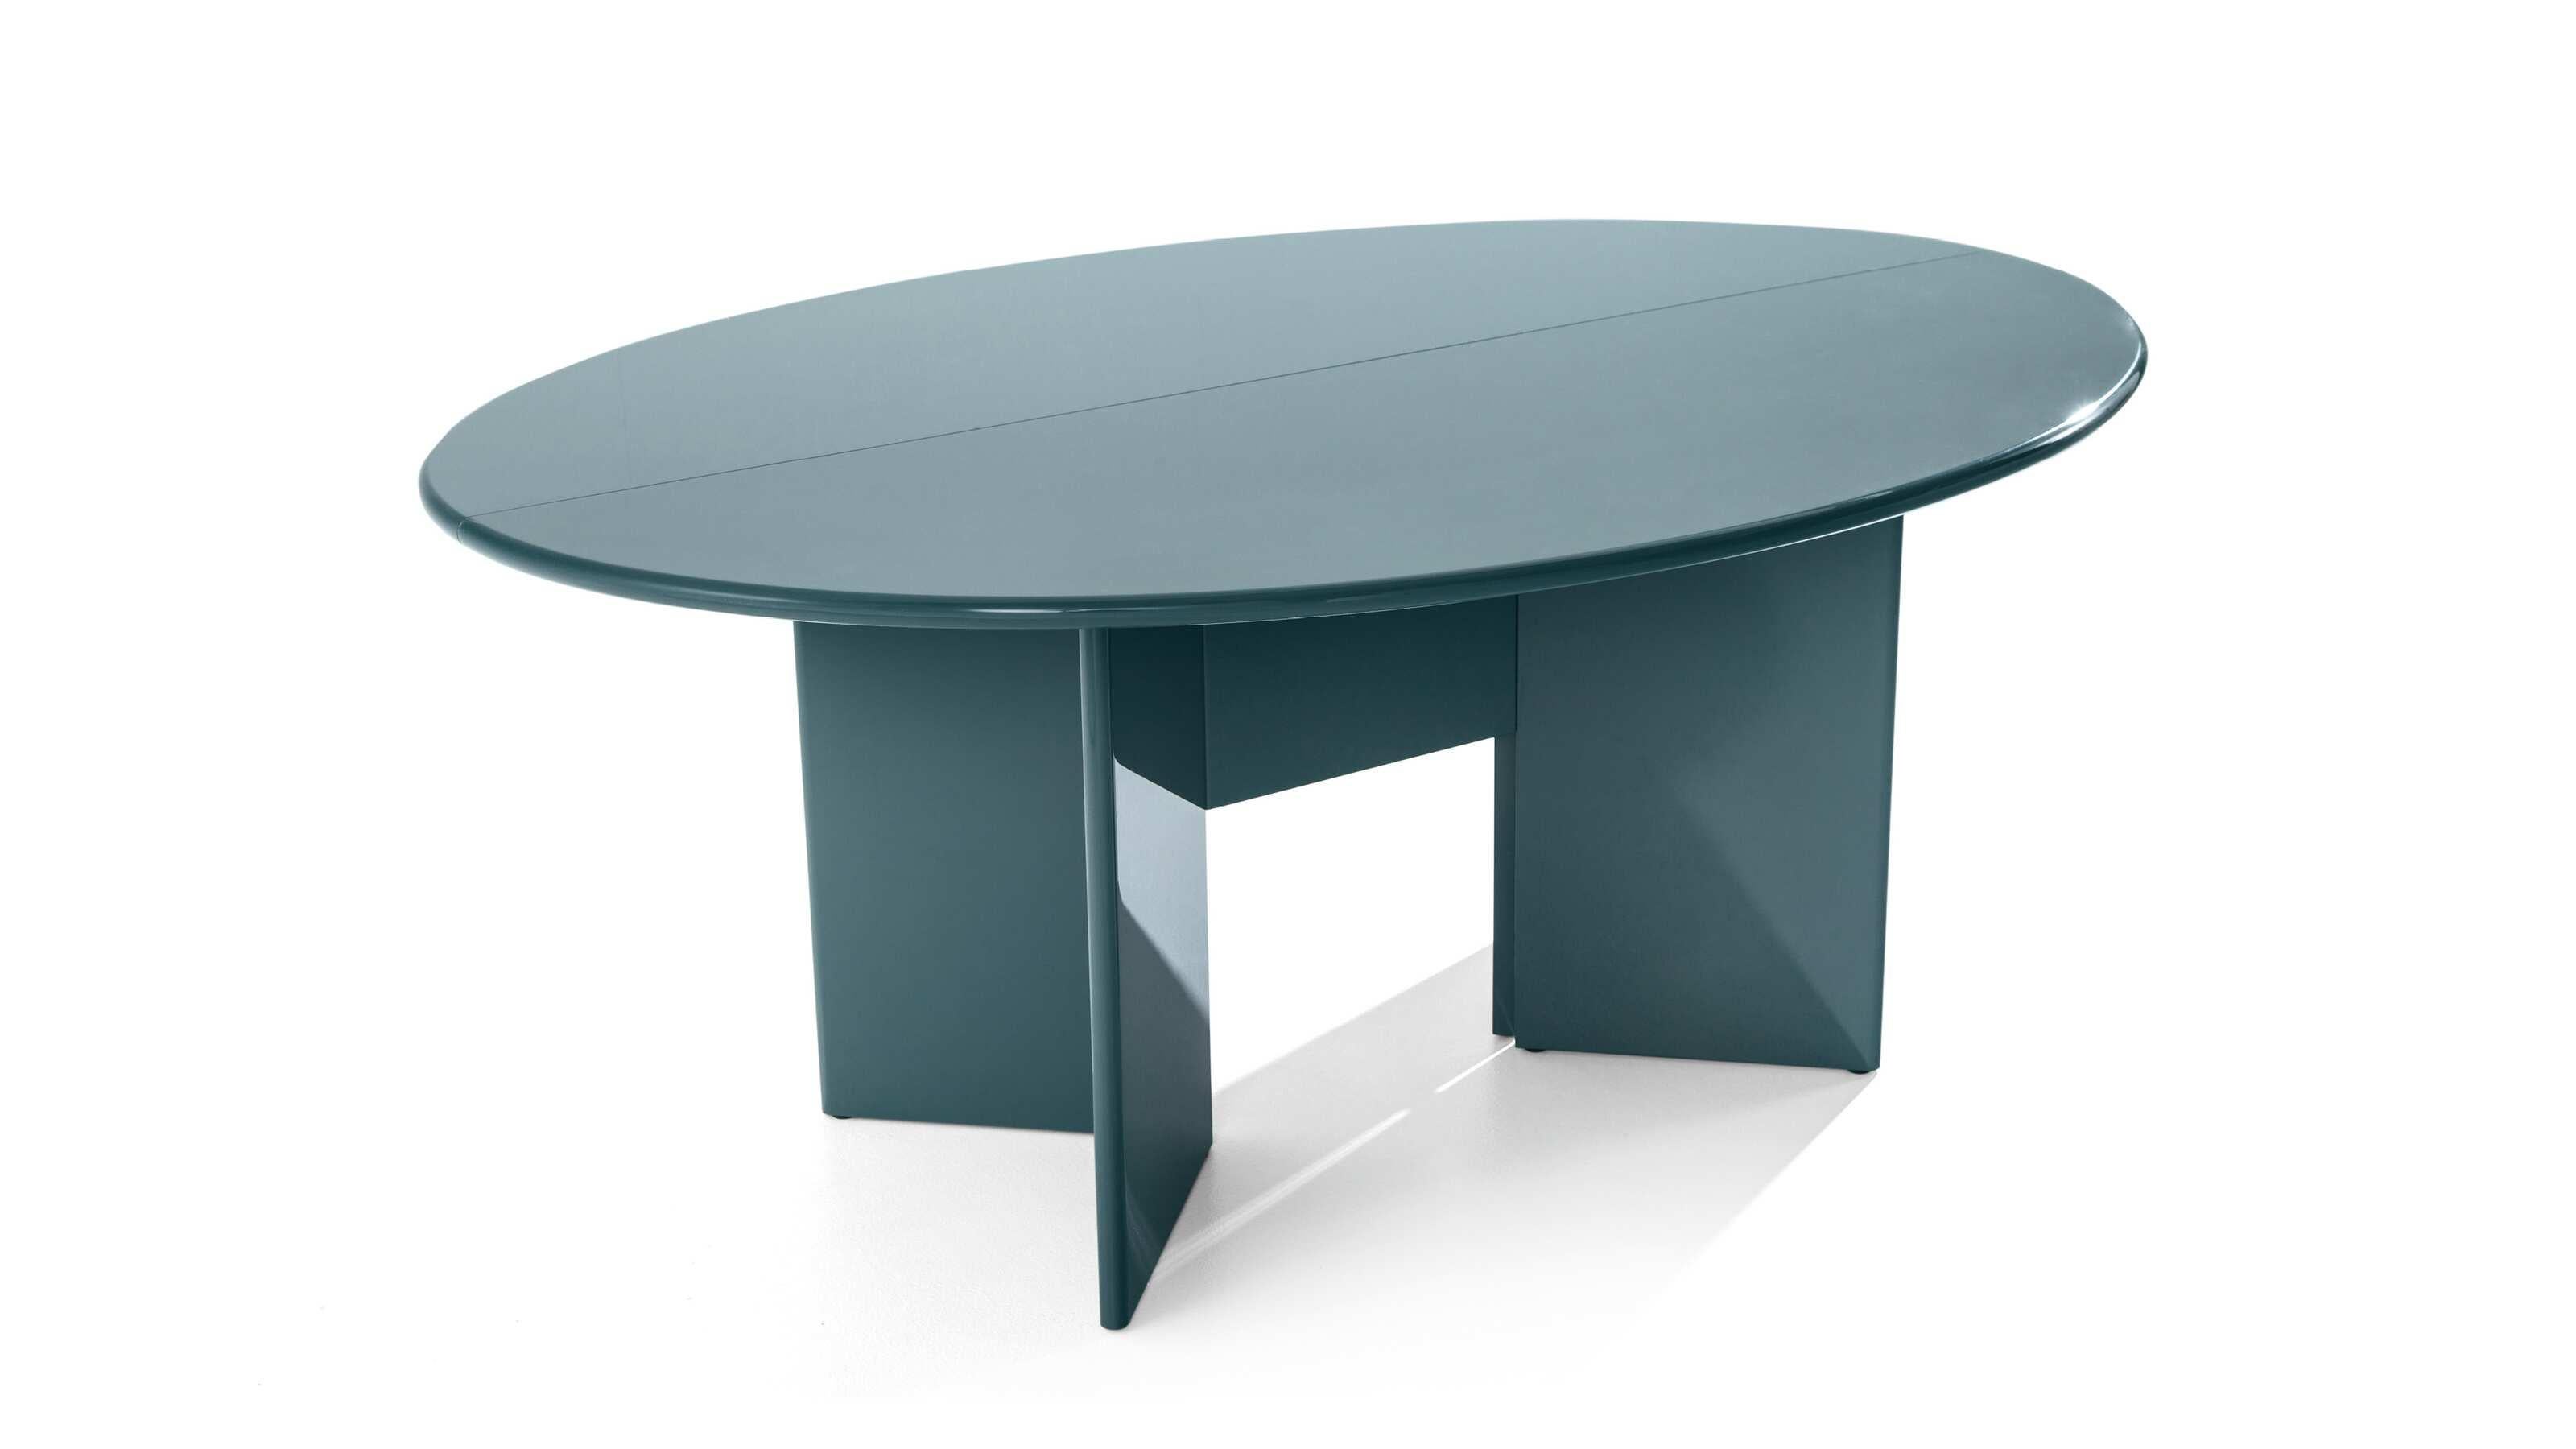 Antella Dining Table by Japanese Architect Kazuhide Takahama for Cassina

Kazuhide Takahama’s Antella is a dual-purpose piece: a console that can be transformed into an oval table. The polyester painted frame, with a gloss or matte finish, is